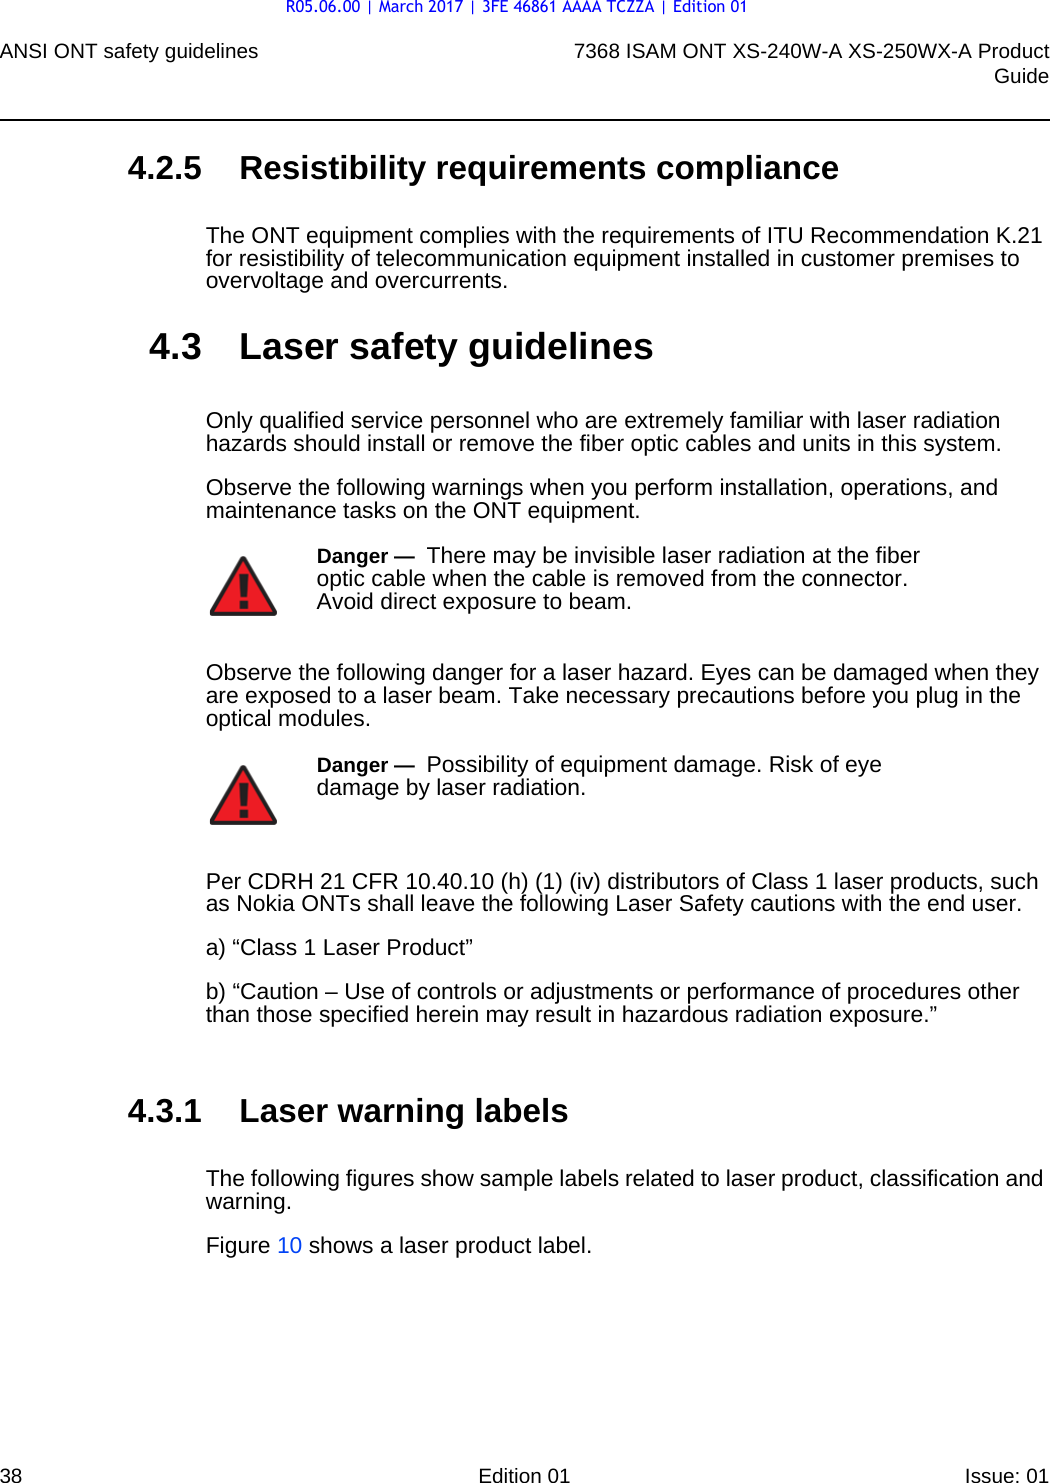 ANSI ONT safety guidelines387368 ISAM ONT XS-240W-A XS-250WX-A ProductGuideEdition 01 Issue: 01 4.2.5 Resistibility requirements complianceThe ONT equipment complies with the requirements of ITU Recommendation K.21 for resistibility of telecommunication equipment installed in customer premises to overvoltage and overcurrents.4.3 Laser safety guidelinesOnly qualified service personnel who are extremely familiar with laser radiation hazards should install or remove the fiber optic cables and units in this system.Observe the following warnings when you perform installation, operations, and maintenance tasks on the ONT equipment.Observe the following danger for a laser hazard. Eyes can be damaged when they are exposed to a laser beam. Take necessary precautions before you plug in the optical modules.Per CDRH 21 CFR 10.40.10 (h) (1) (iv) distributors of Class 1 laser products, such as Nokia ONTs shall leave the following Laser Safety cautions with the end user.a) “Class 1 Laser Product”b) “Caution – Use of controls or adjustments or performance of procedures other than those specified herein may result in hazardous radiation exposure.”4.3.1 Laser warning labelsThe following figures show sample labels related to laser product, classification and warning. Figure 10 shows a laser product label.Danger —  There may be invisible laser radiation at the fiber optic cable when the cable is removed from the connector. Avoid direct exposure to beam.Danger —  Possibility of equipment damage. Risk of eye damage by laser radiation.R05.06.00 | March 2017 | 3FE 46861 AAAA TCZZA | Edition 01